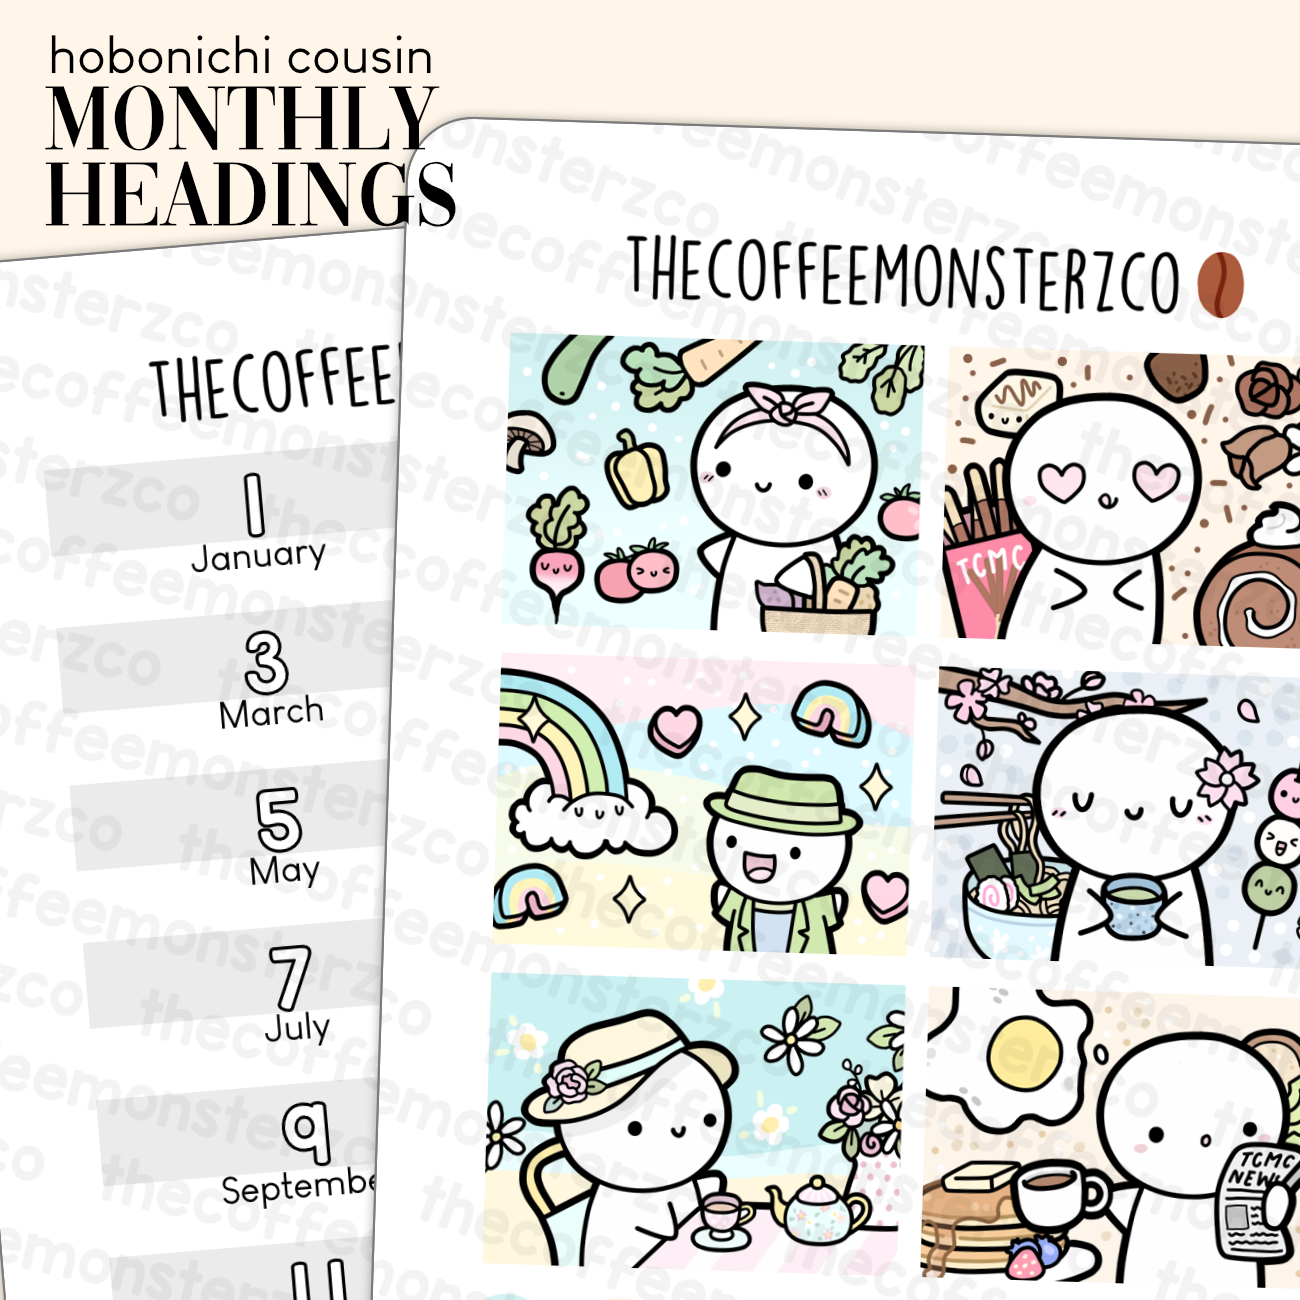 Monthly Artwork &amp; Text - Hobonichi Cousin